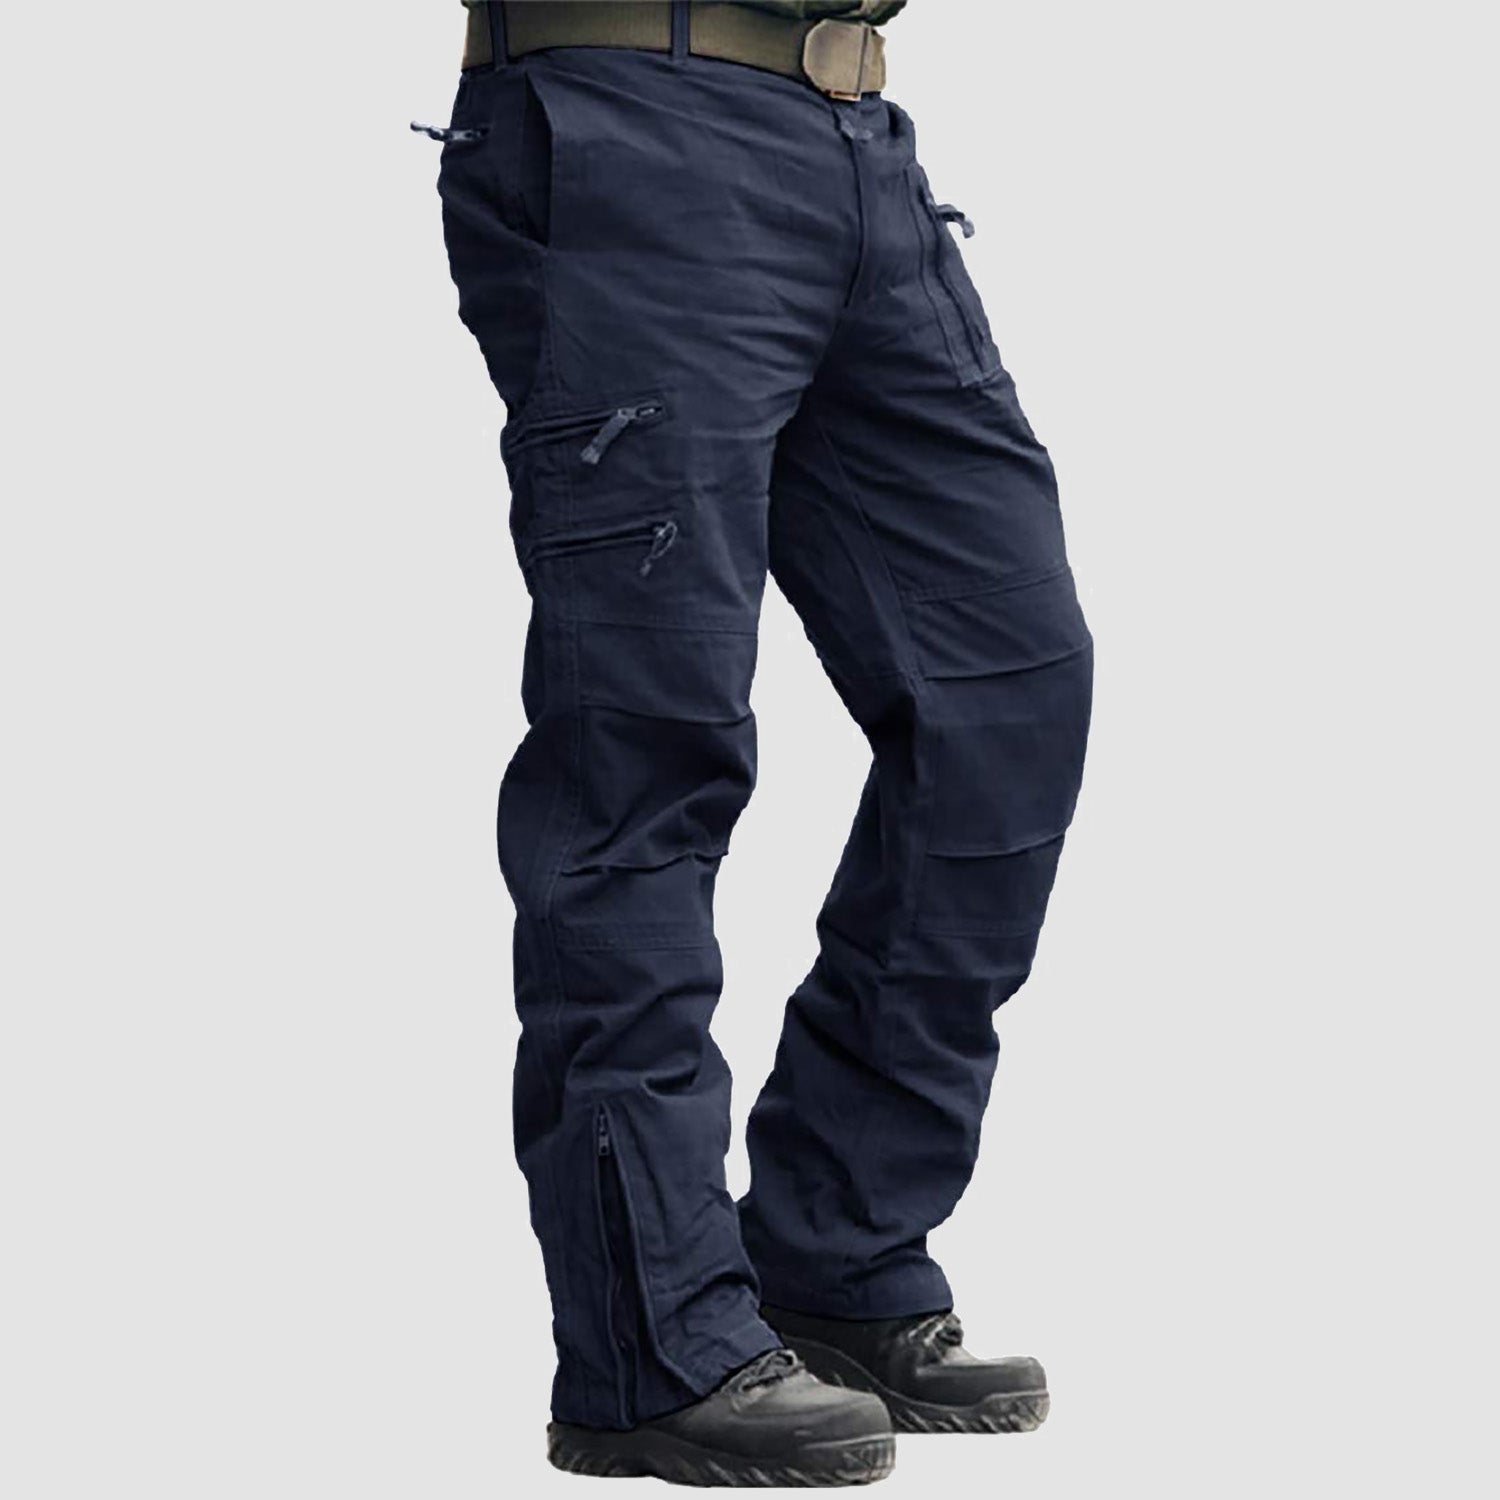 Men's Tactical Pants with 9 Pockets Ripstop Cargo Pants Lightweight Hiking